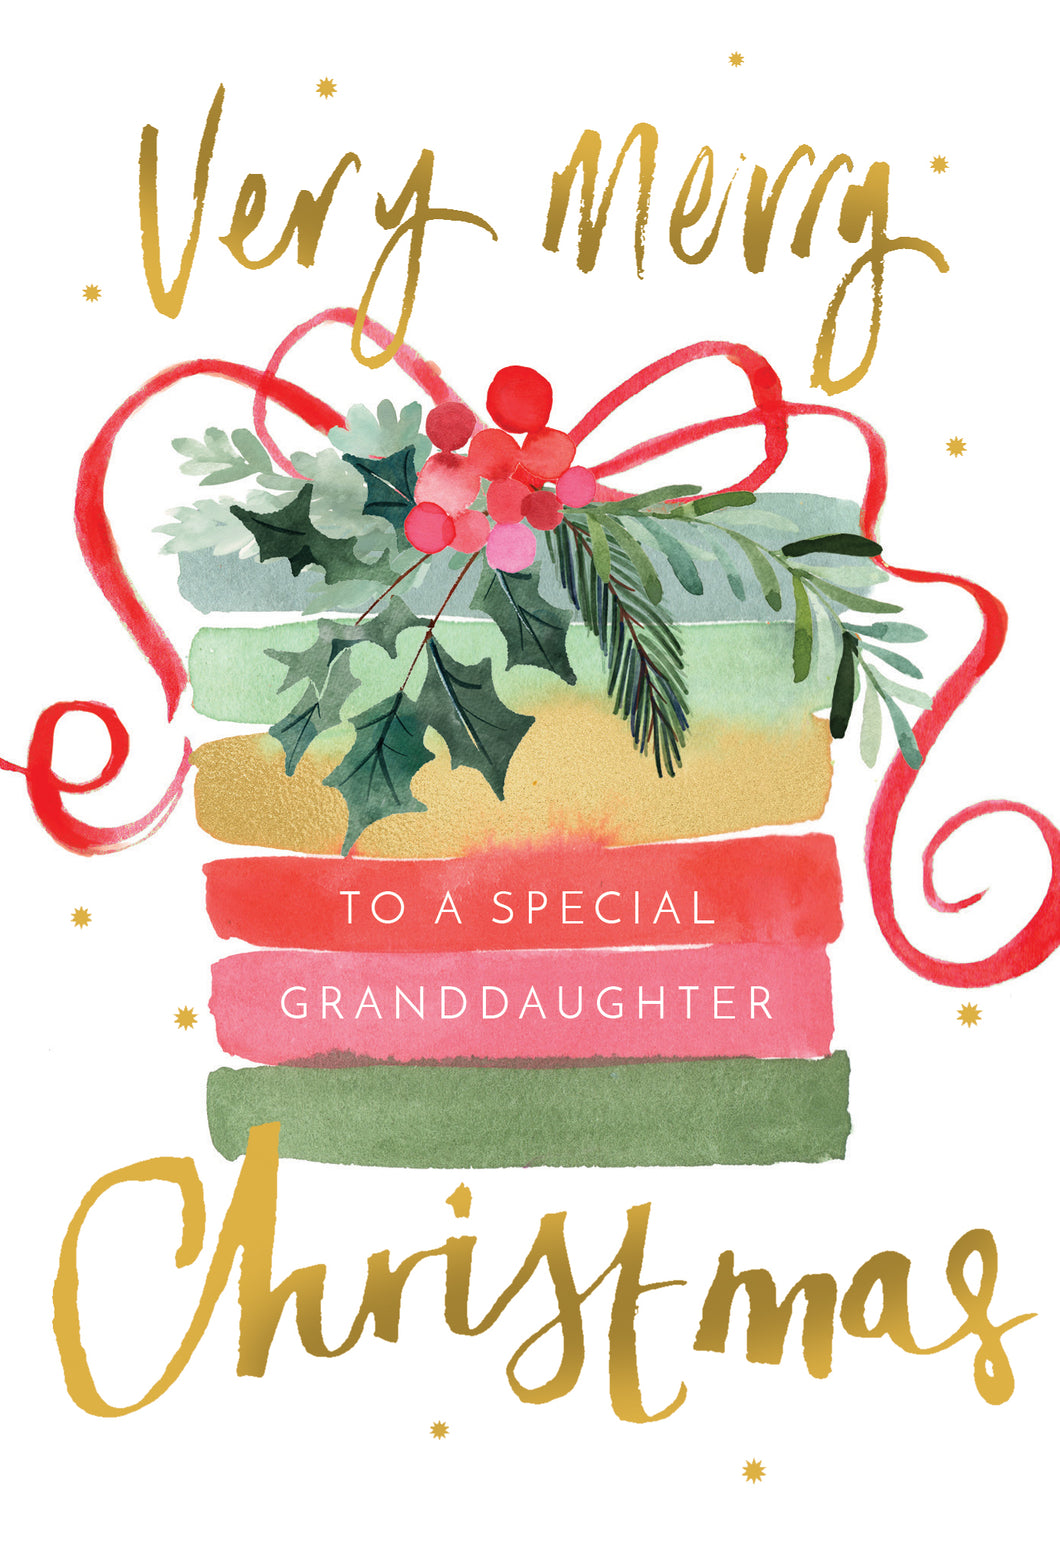 Striped Present Christmas Card Granddaughter - Cardmore